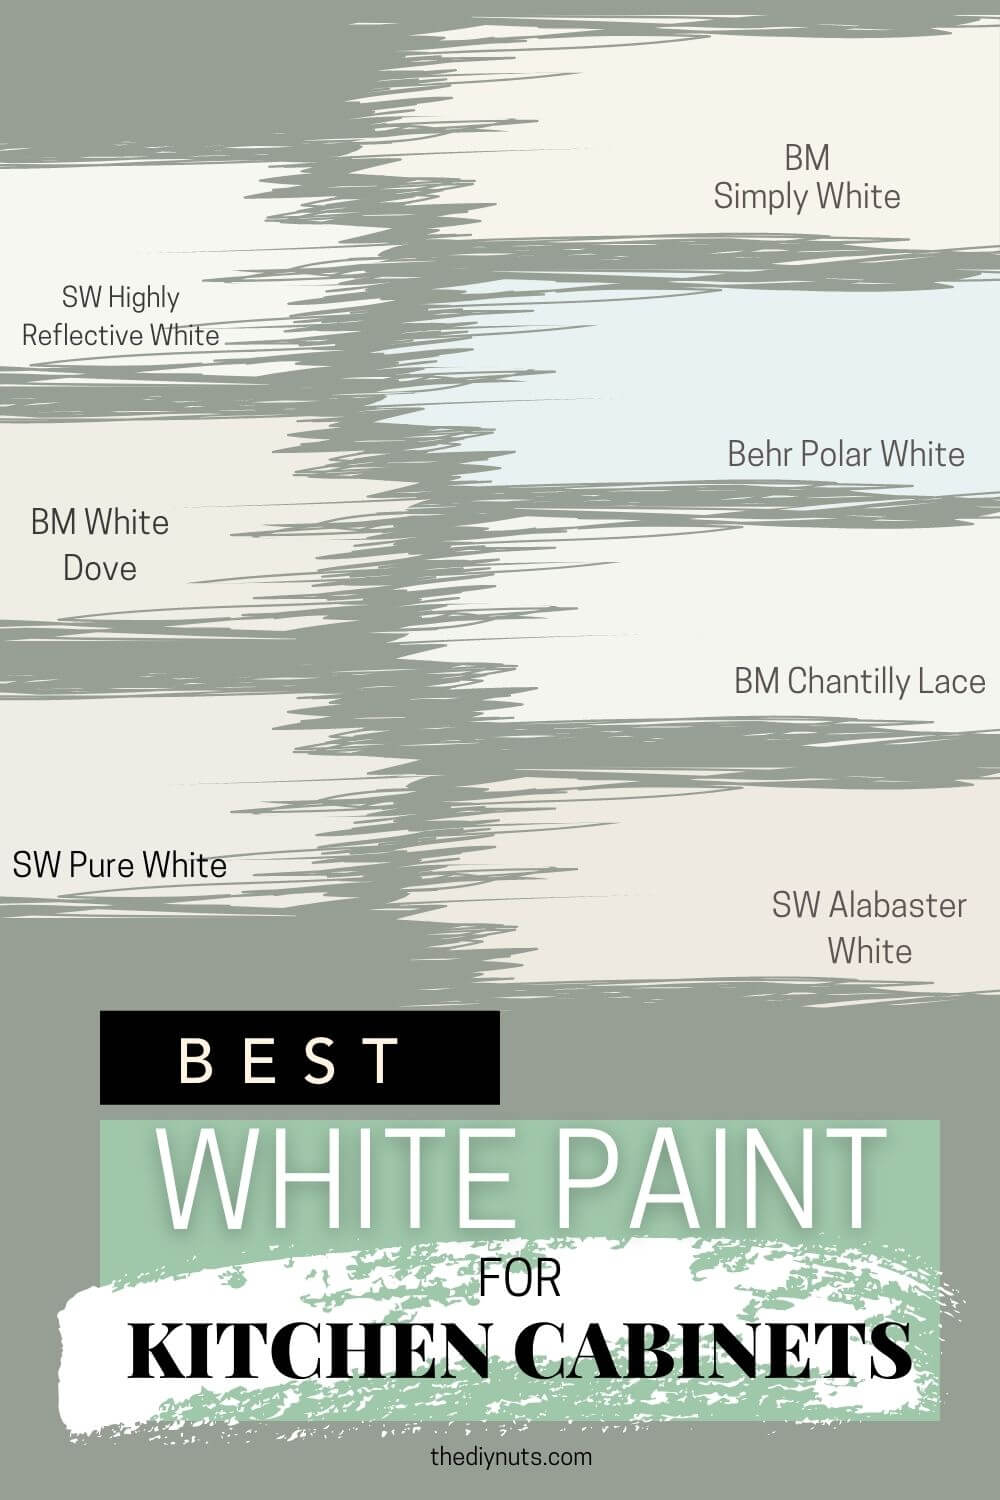 White paint options with best white paints for kitchen cabinets.